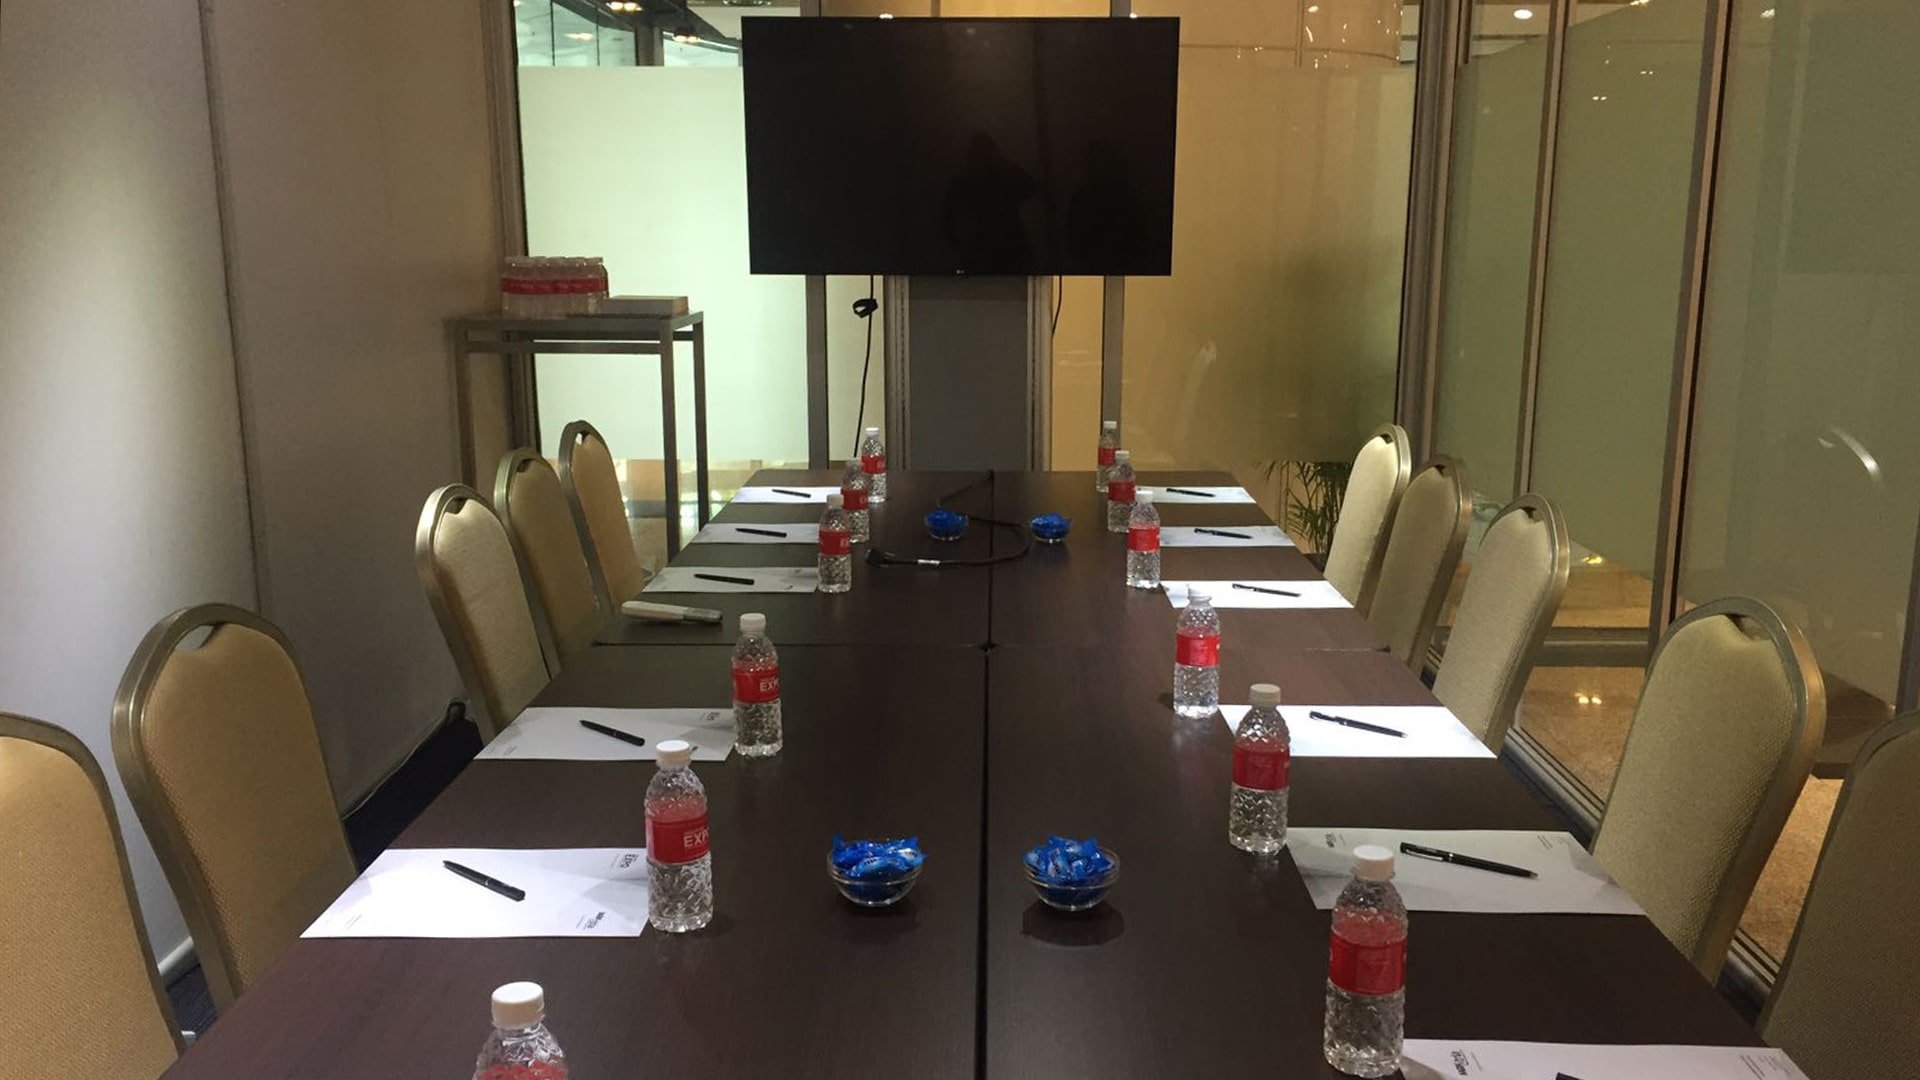 tsc_opt-images_tubelar-system_expo-lot-asia-meeting-room-1920x1080-02-min